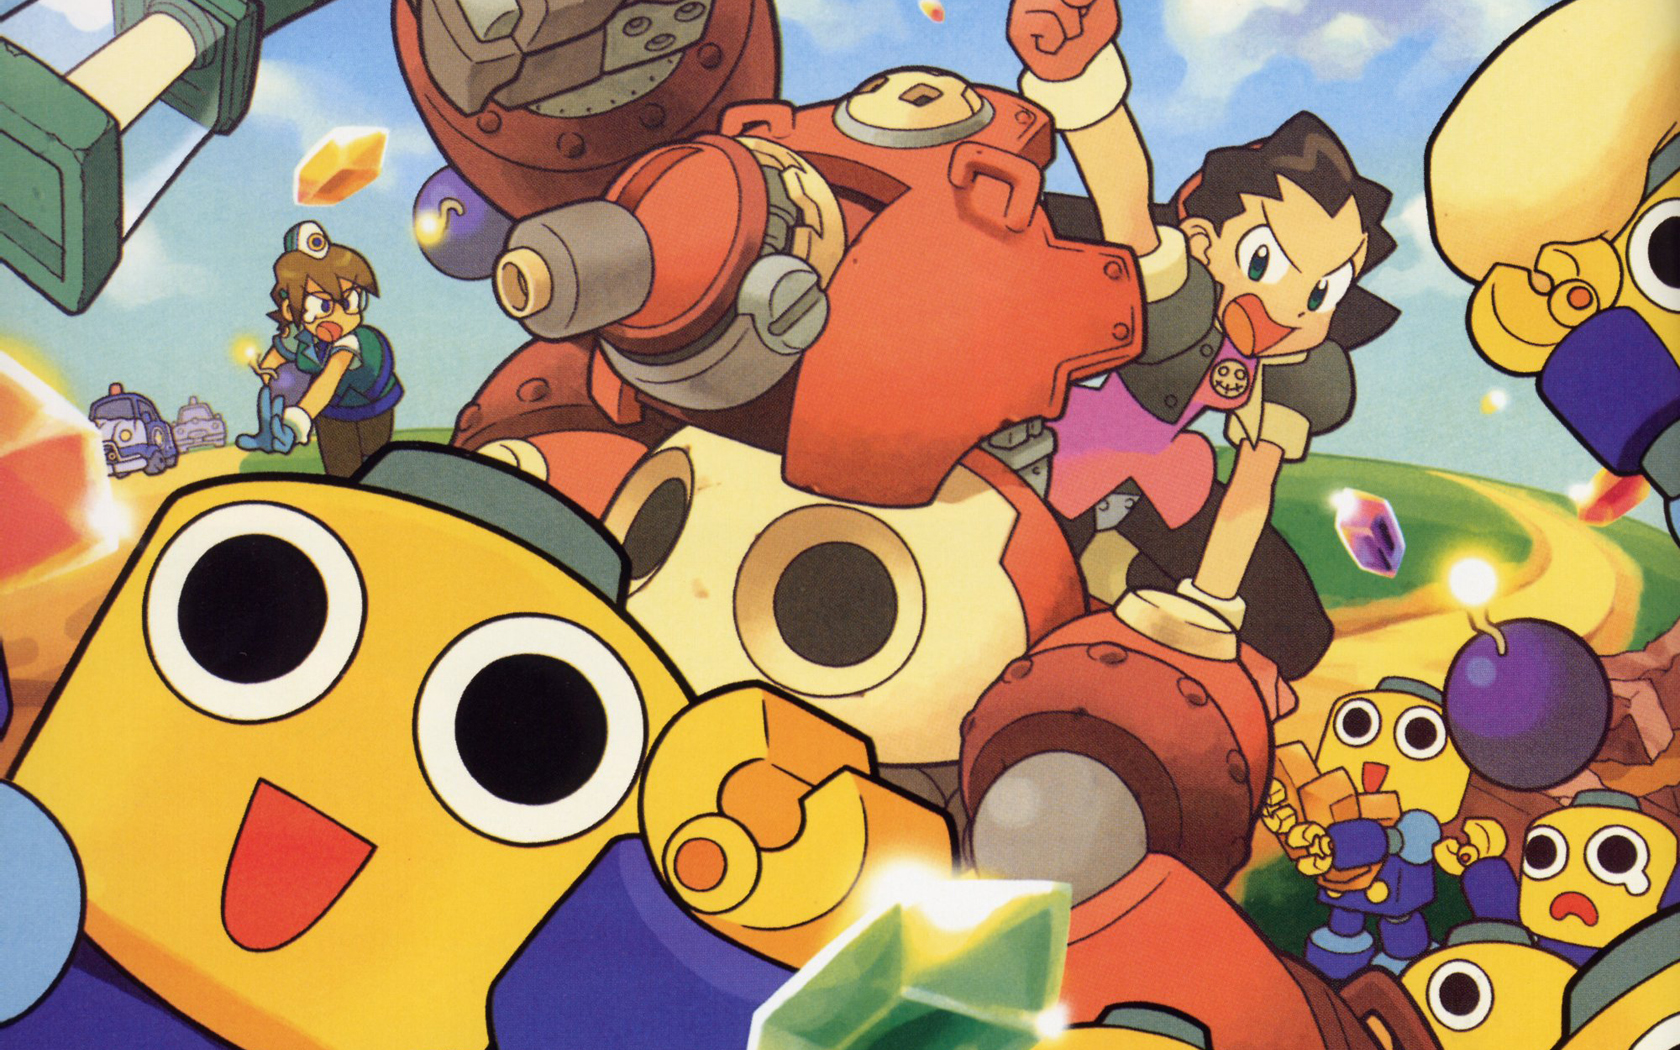 Free The Misadventures Of Tron Bonne Wallpapers